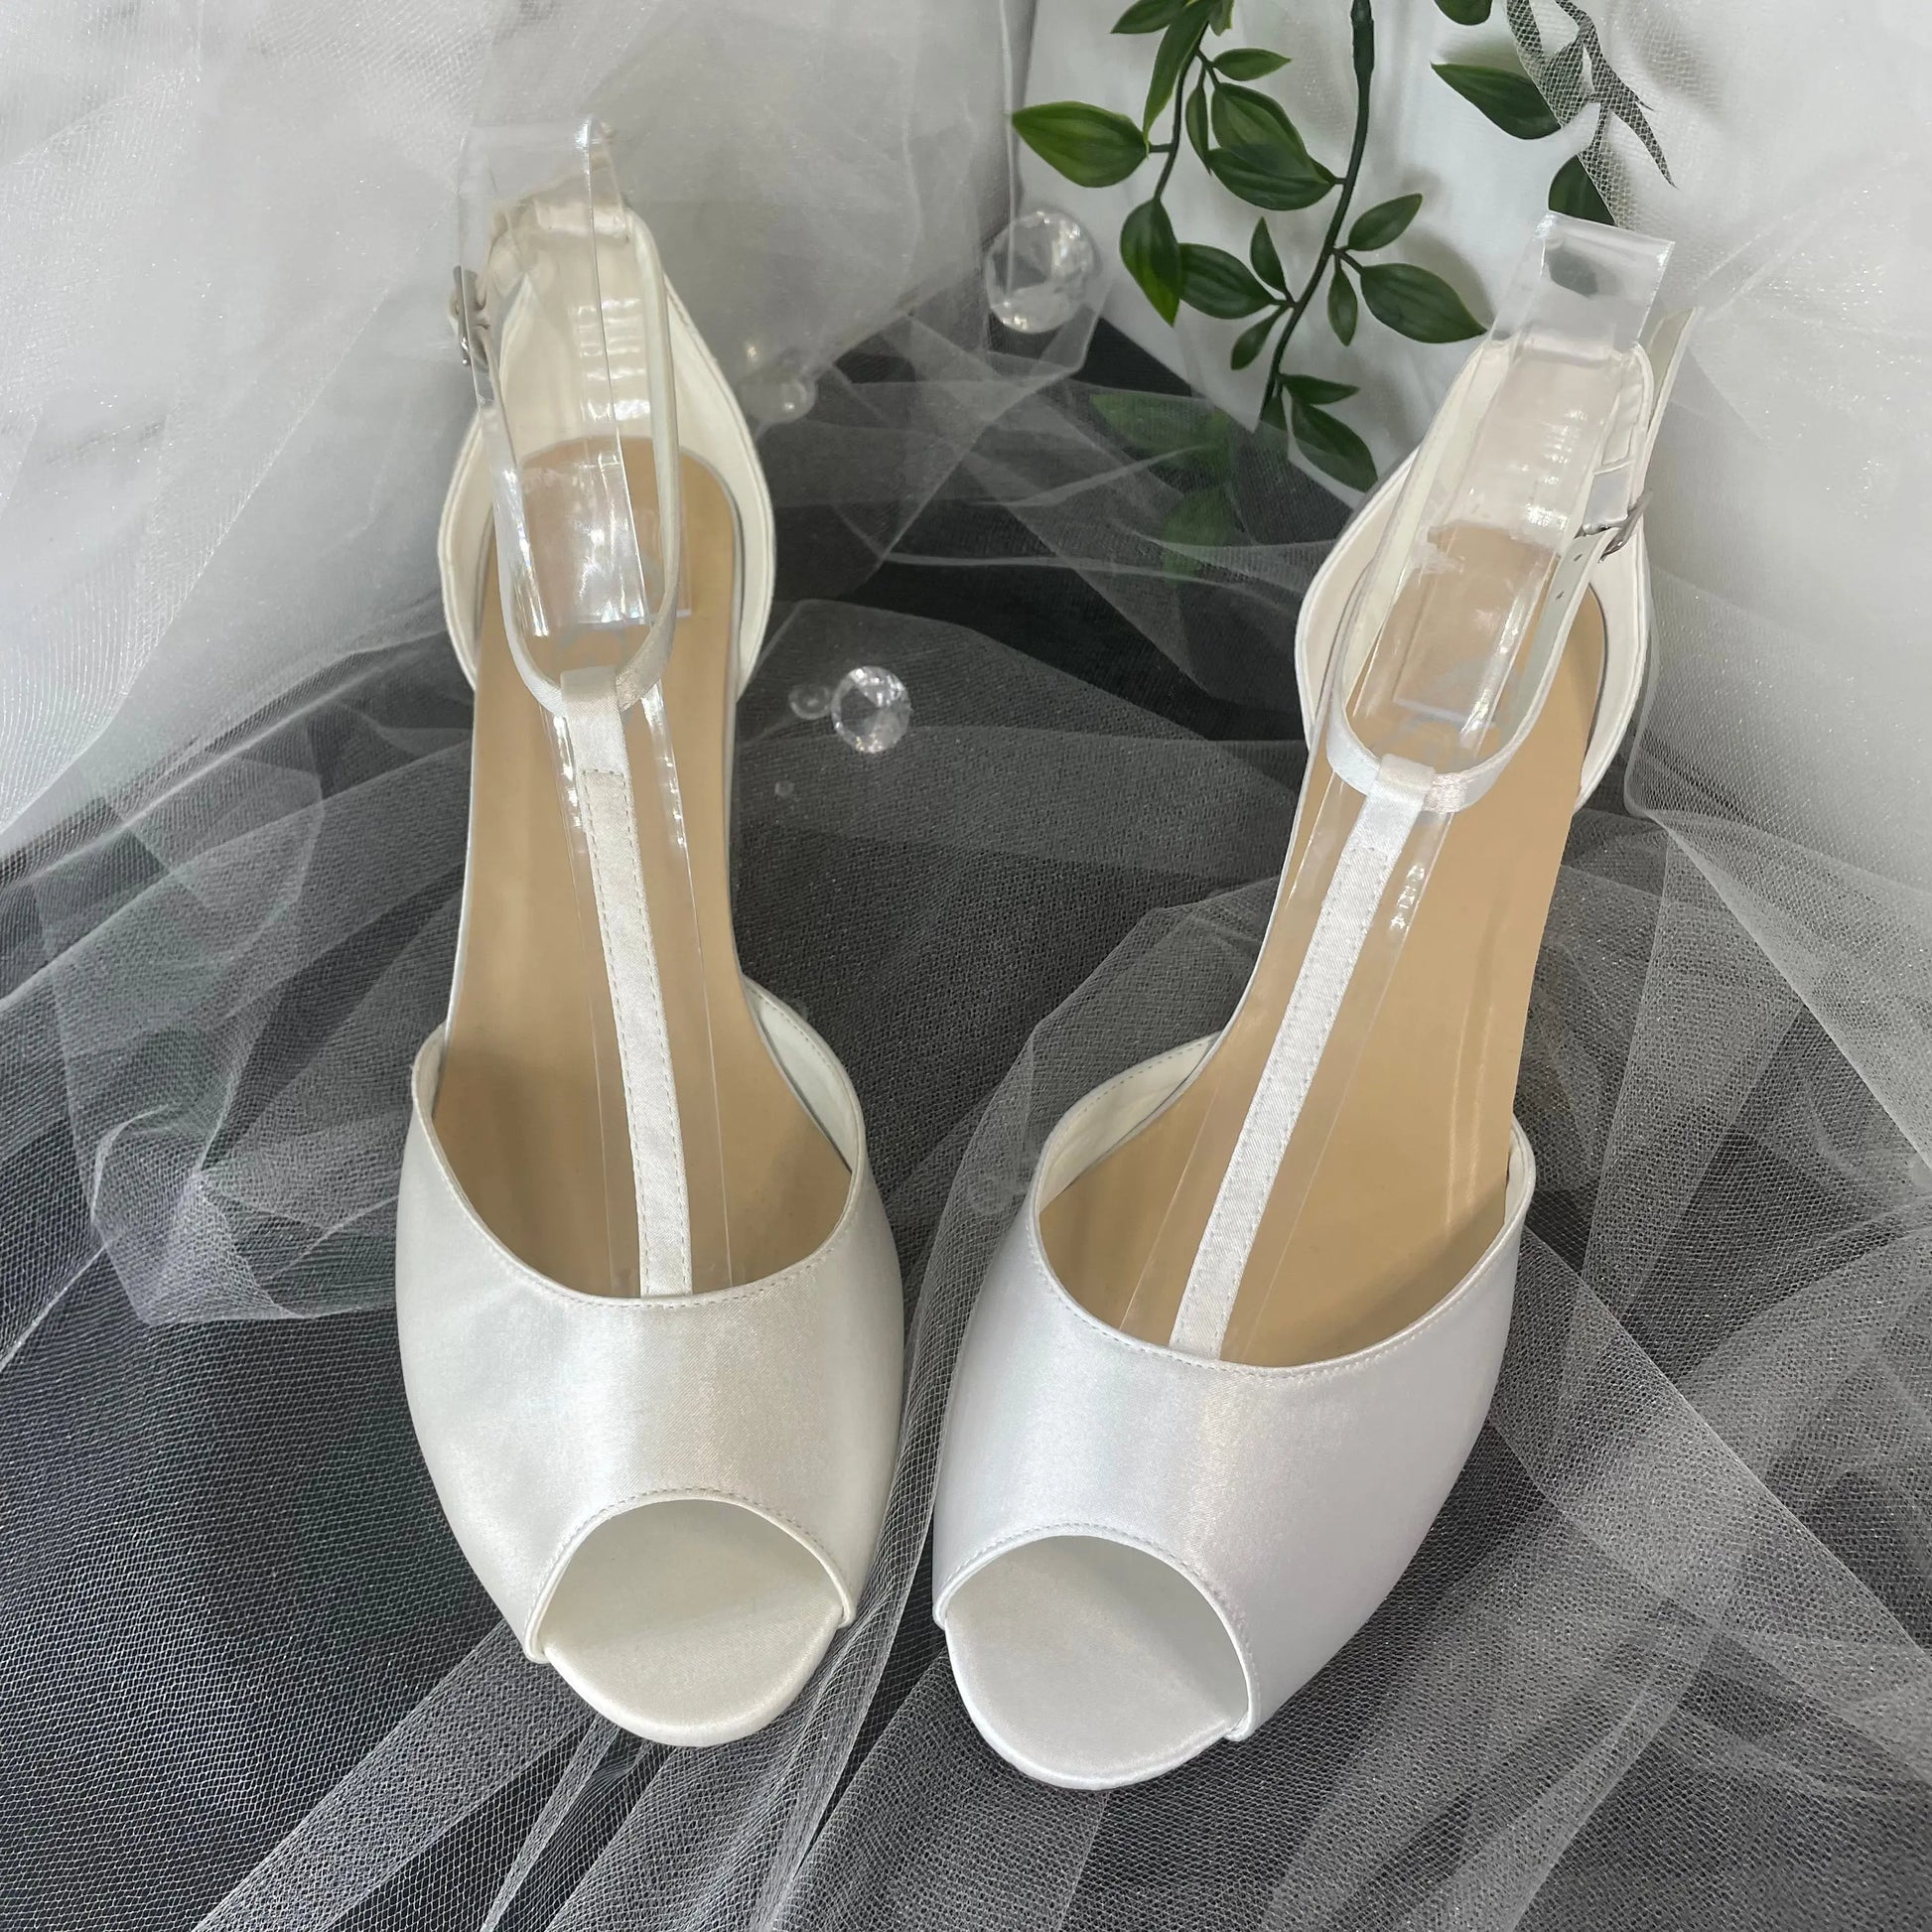 Flora Peep Toe T-bar Bridal Shoes with Ankle Strap on Tulle Background